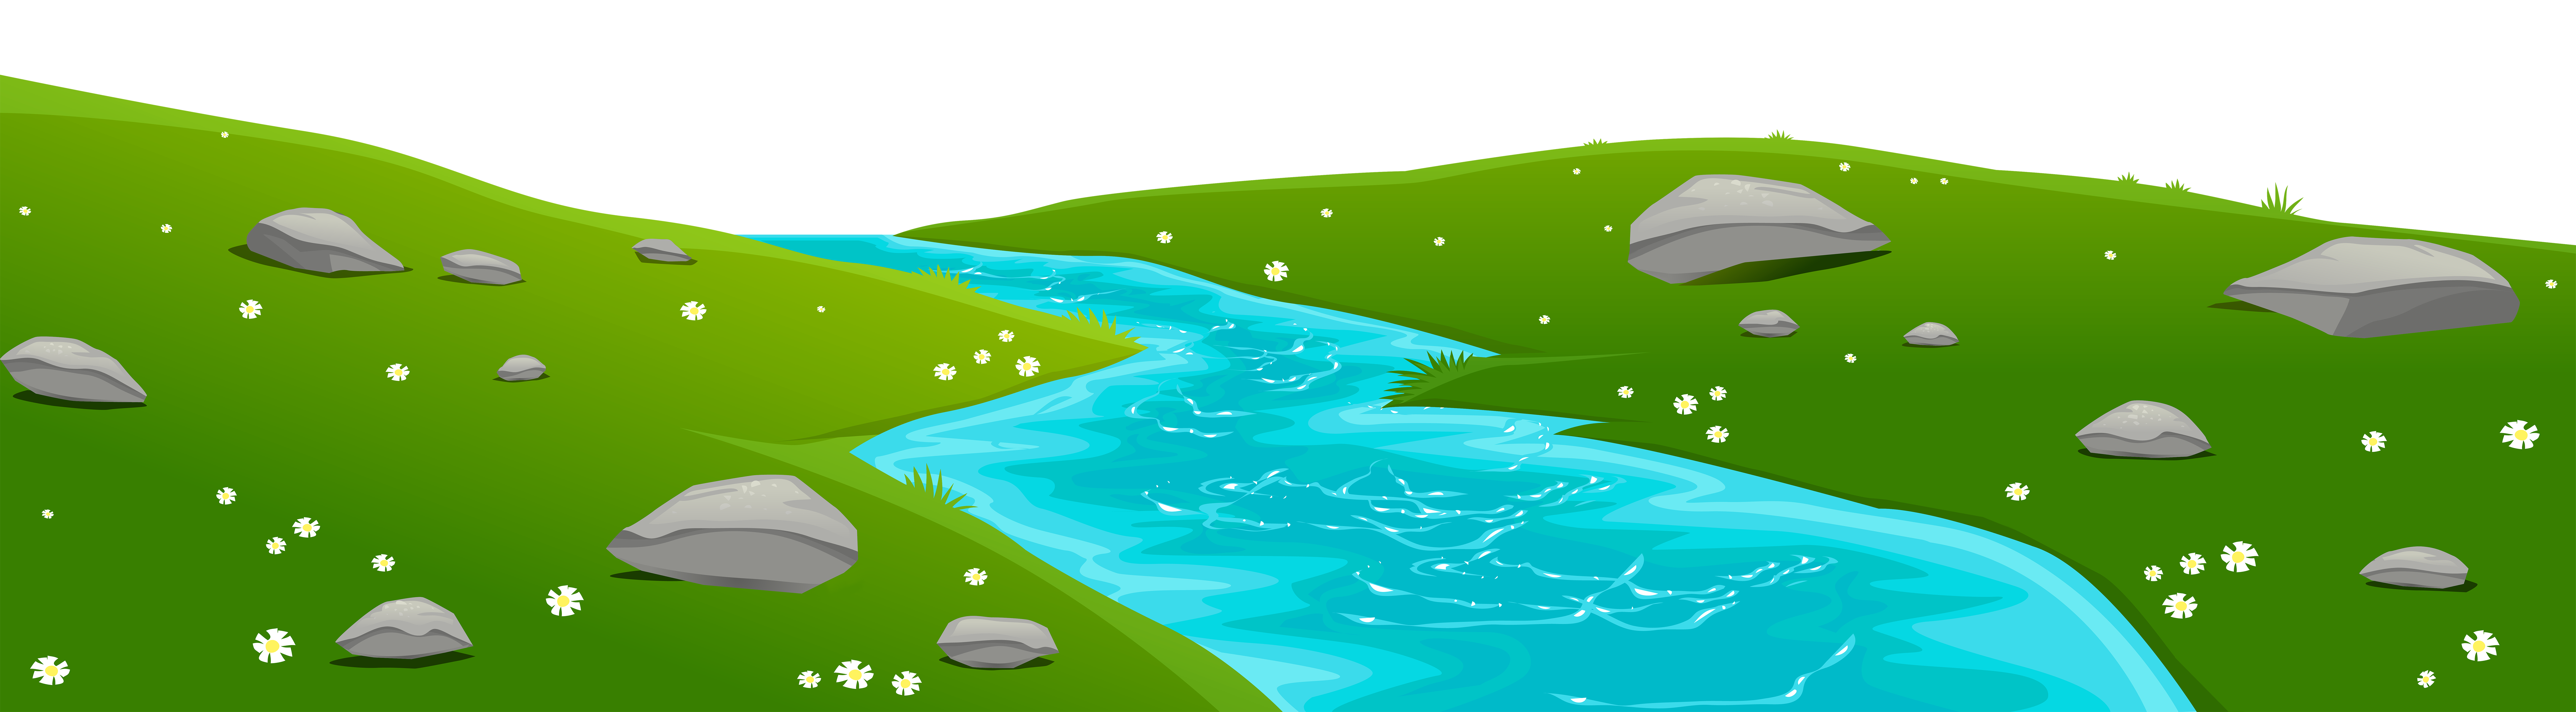 River clipart free images